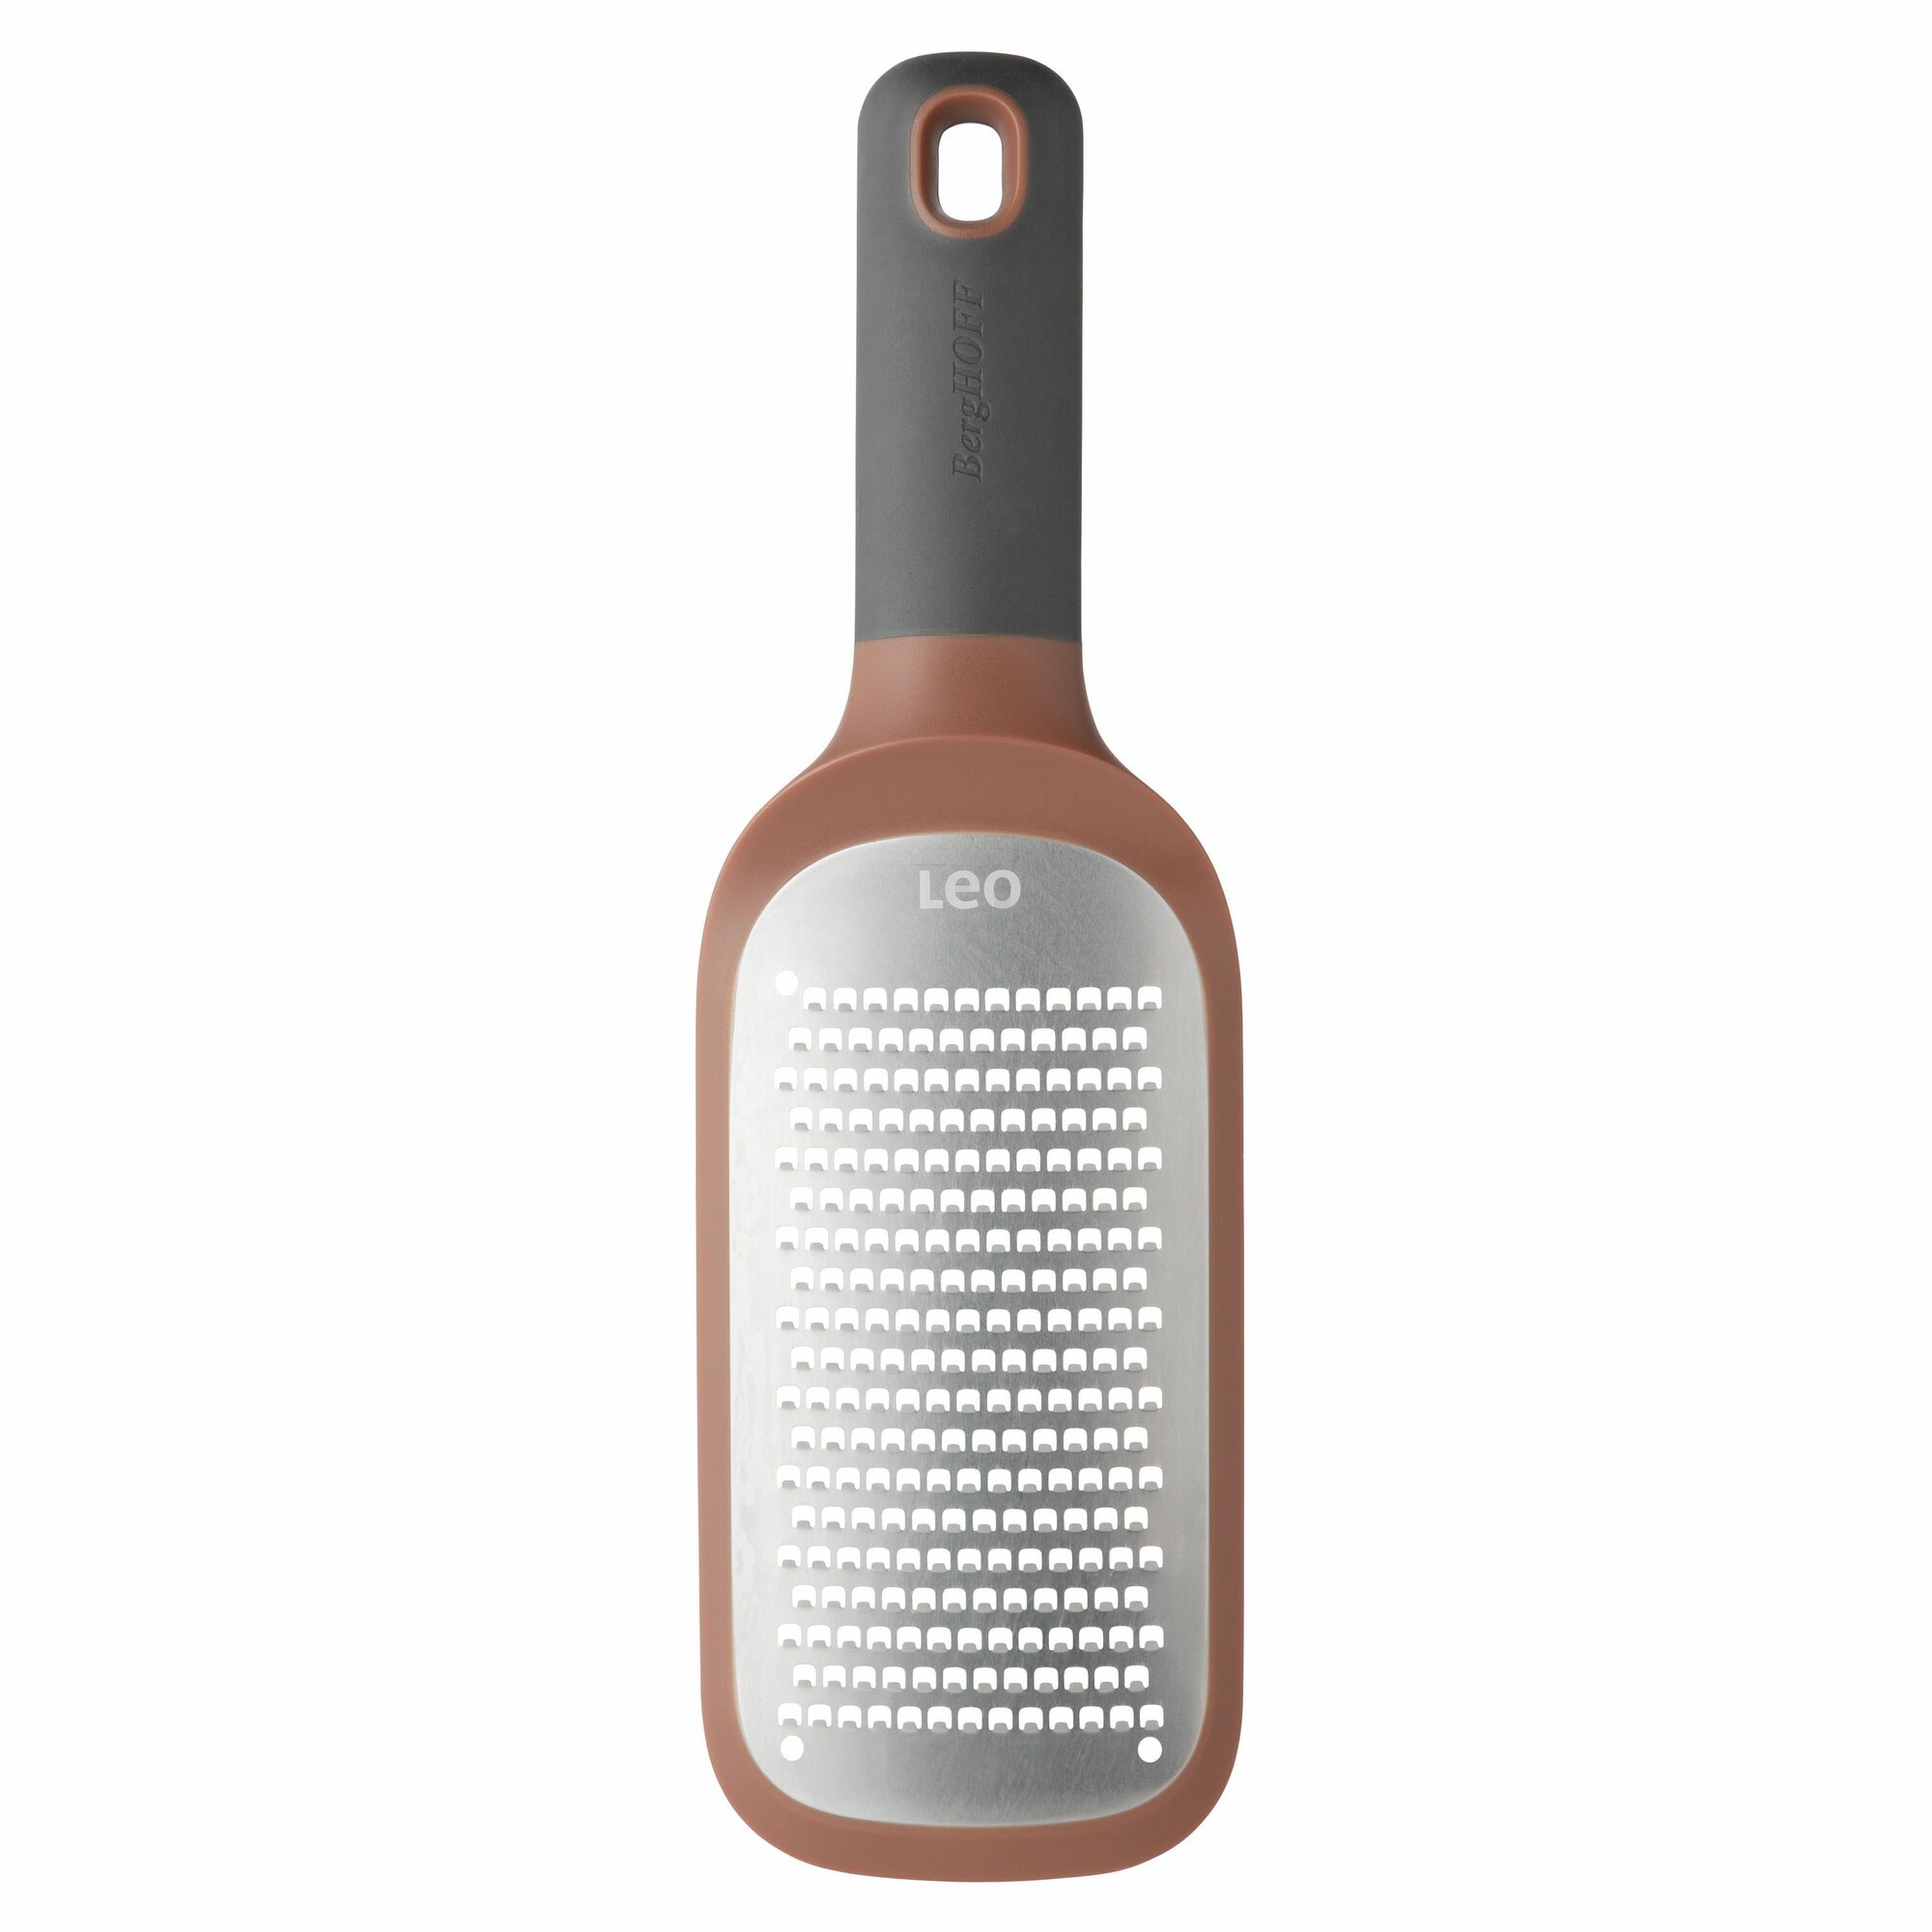 Microplane Bowl Grater, Extra Coarse